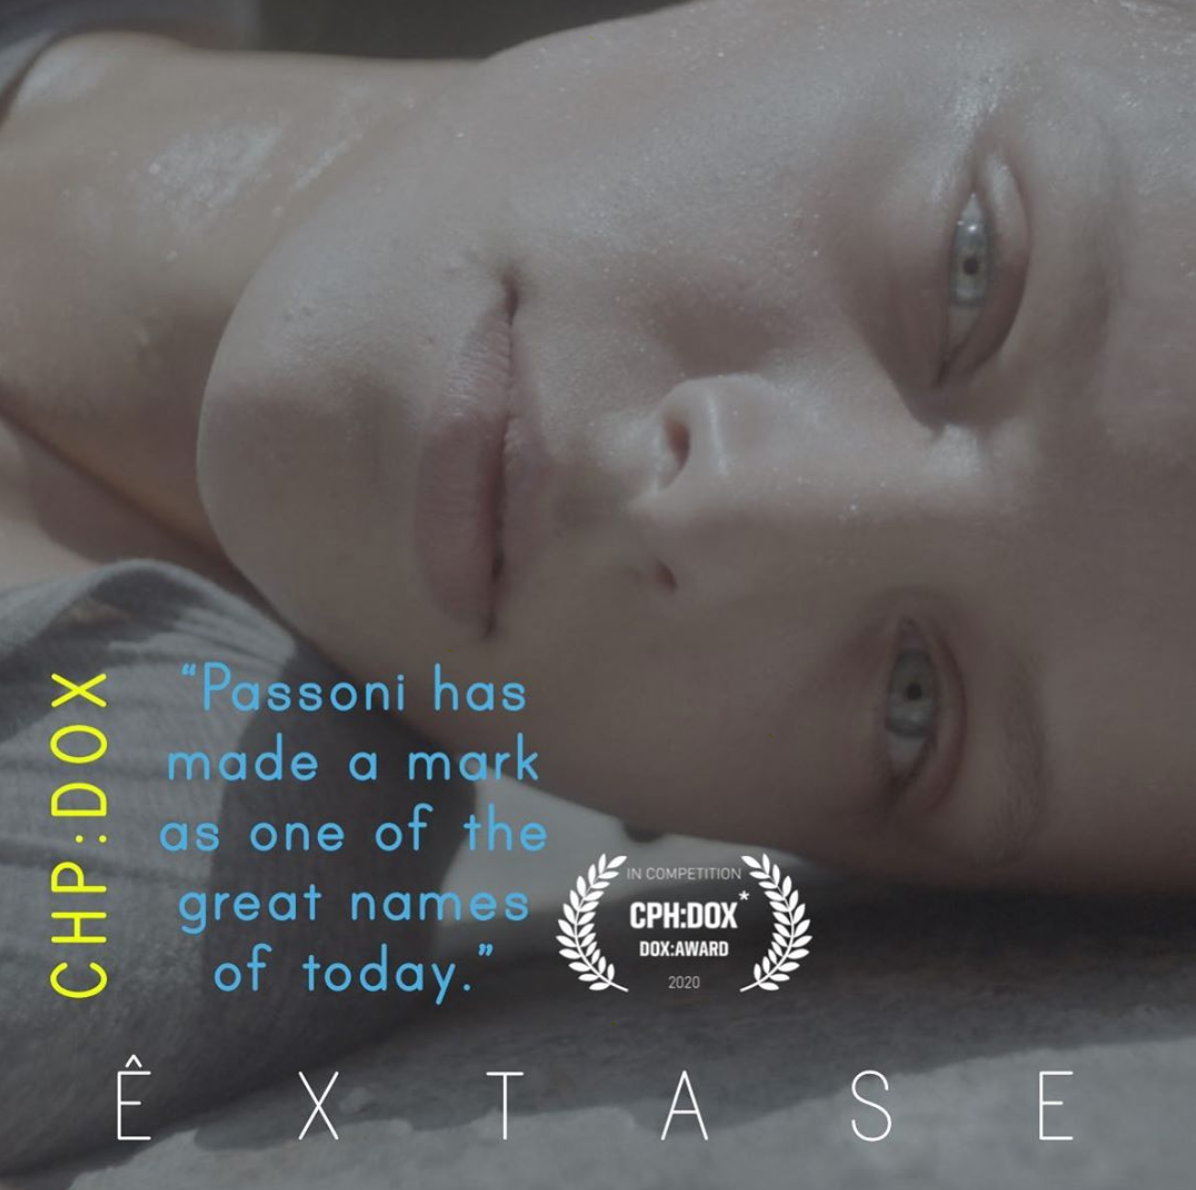 ÊXTASE: a feature doc released to rave reviews in a very similar condition to its main character - isolated from other bodies.